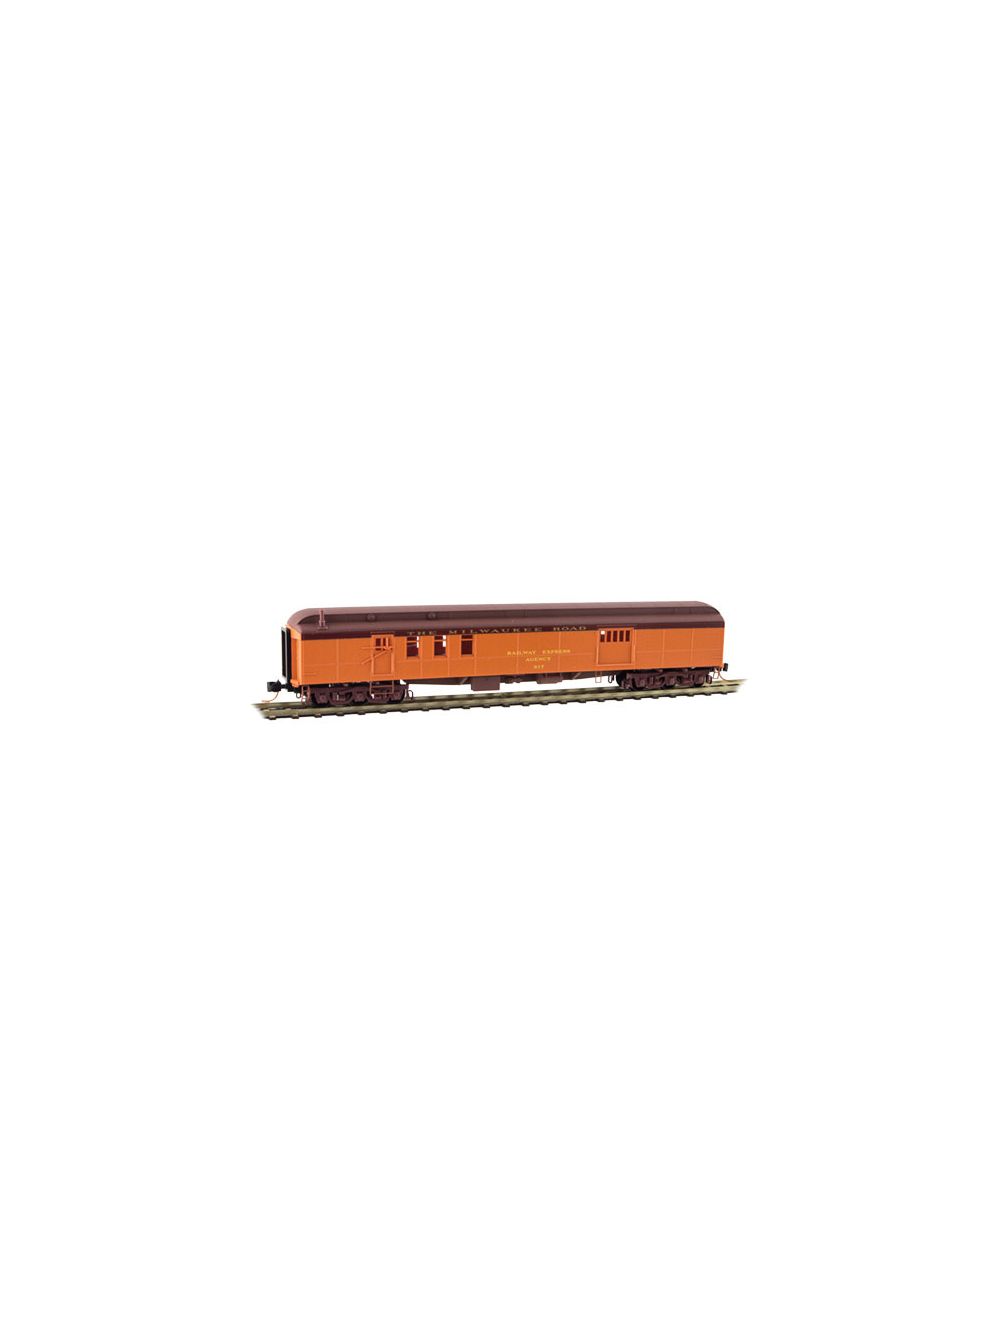 N Scale Micro-trains 14800120 70' Heavyweight Mail Baggage Car Milwaukee Road for sale online 